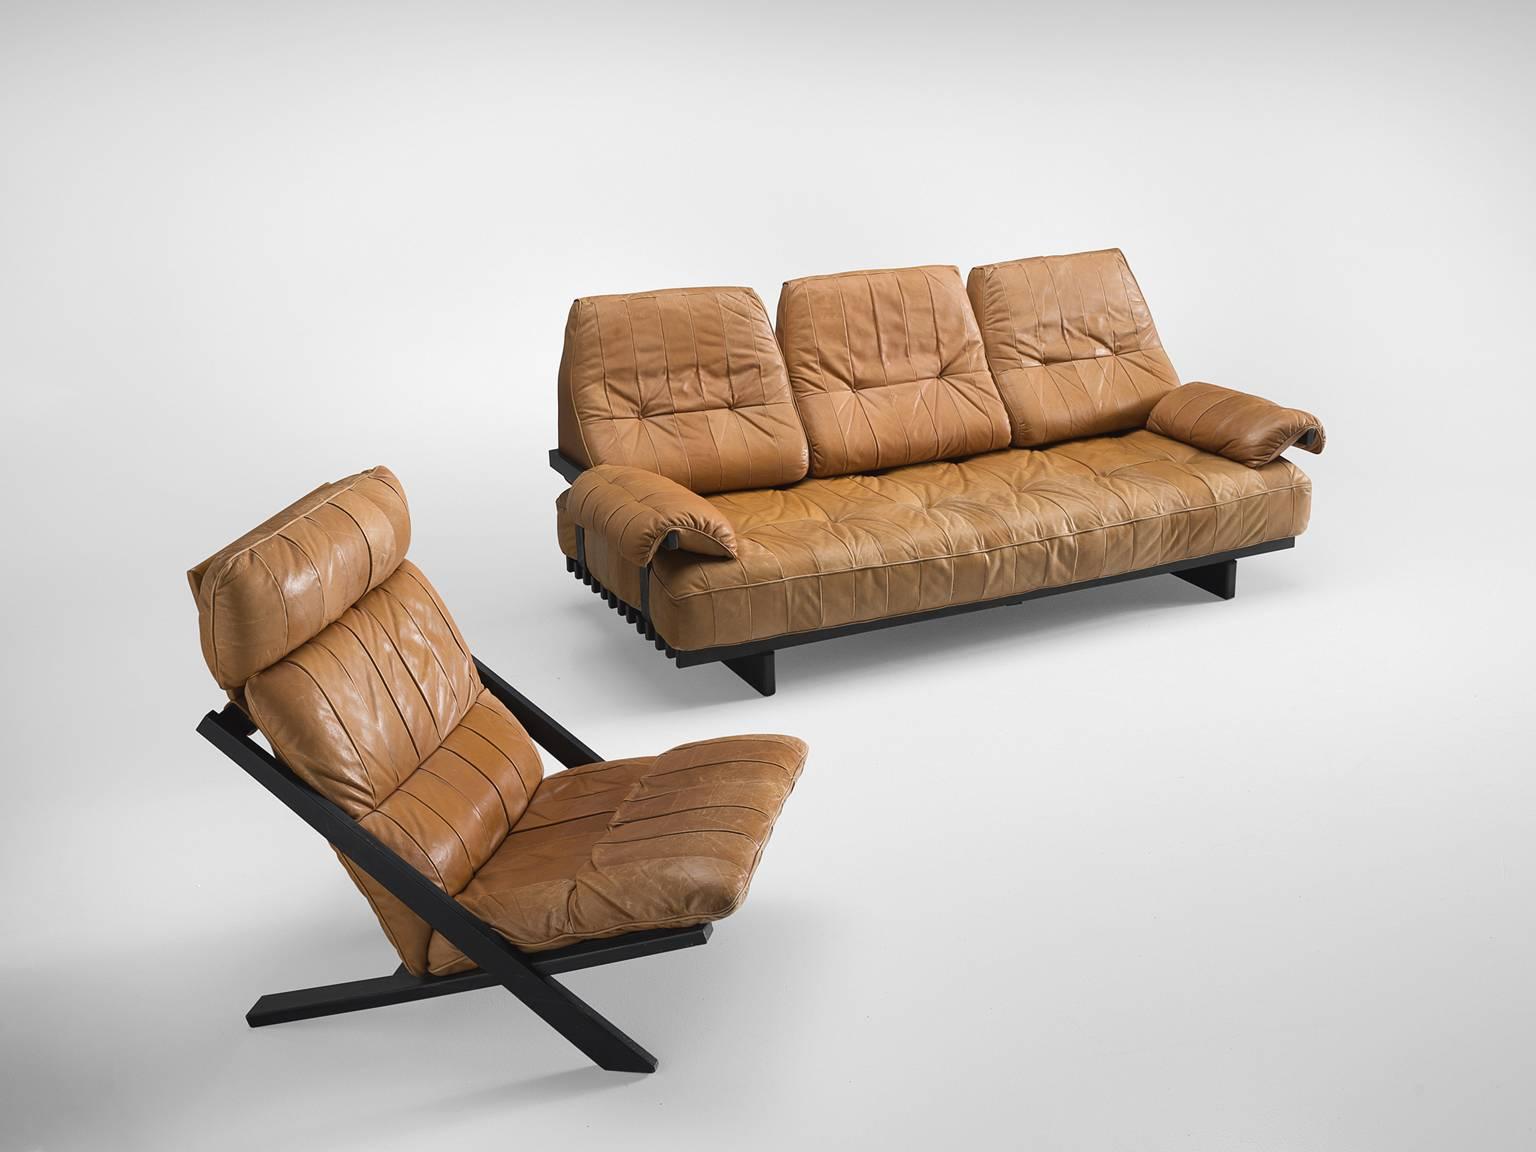 Ueli bergère for De Sede, lounge chair and sofa DS 80, in wood and cognac leather, Switzerland, 1970s.

High back lounge chair by de Swiss quality manufacturer De Sede. The X-shaped frame consists of black lacquered wood. This makes an interesting